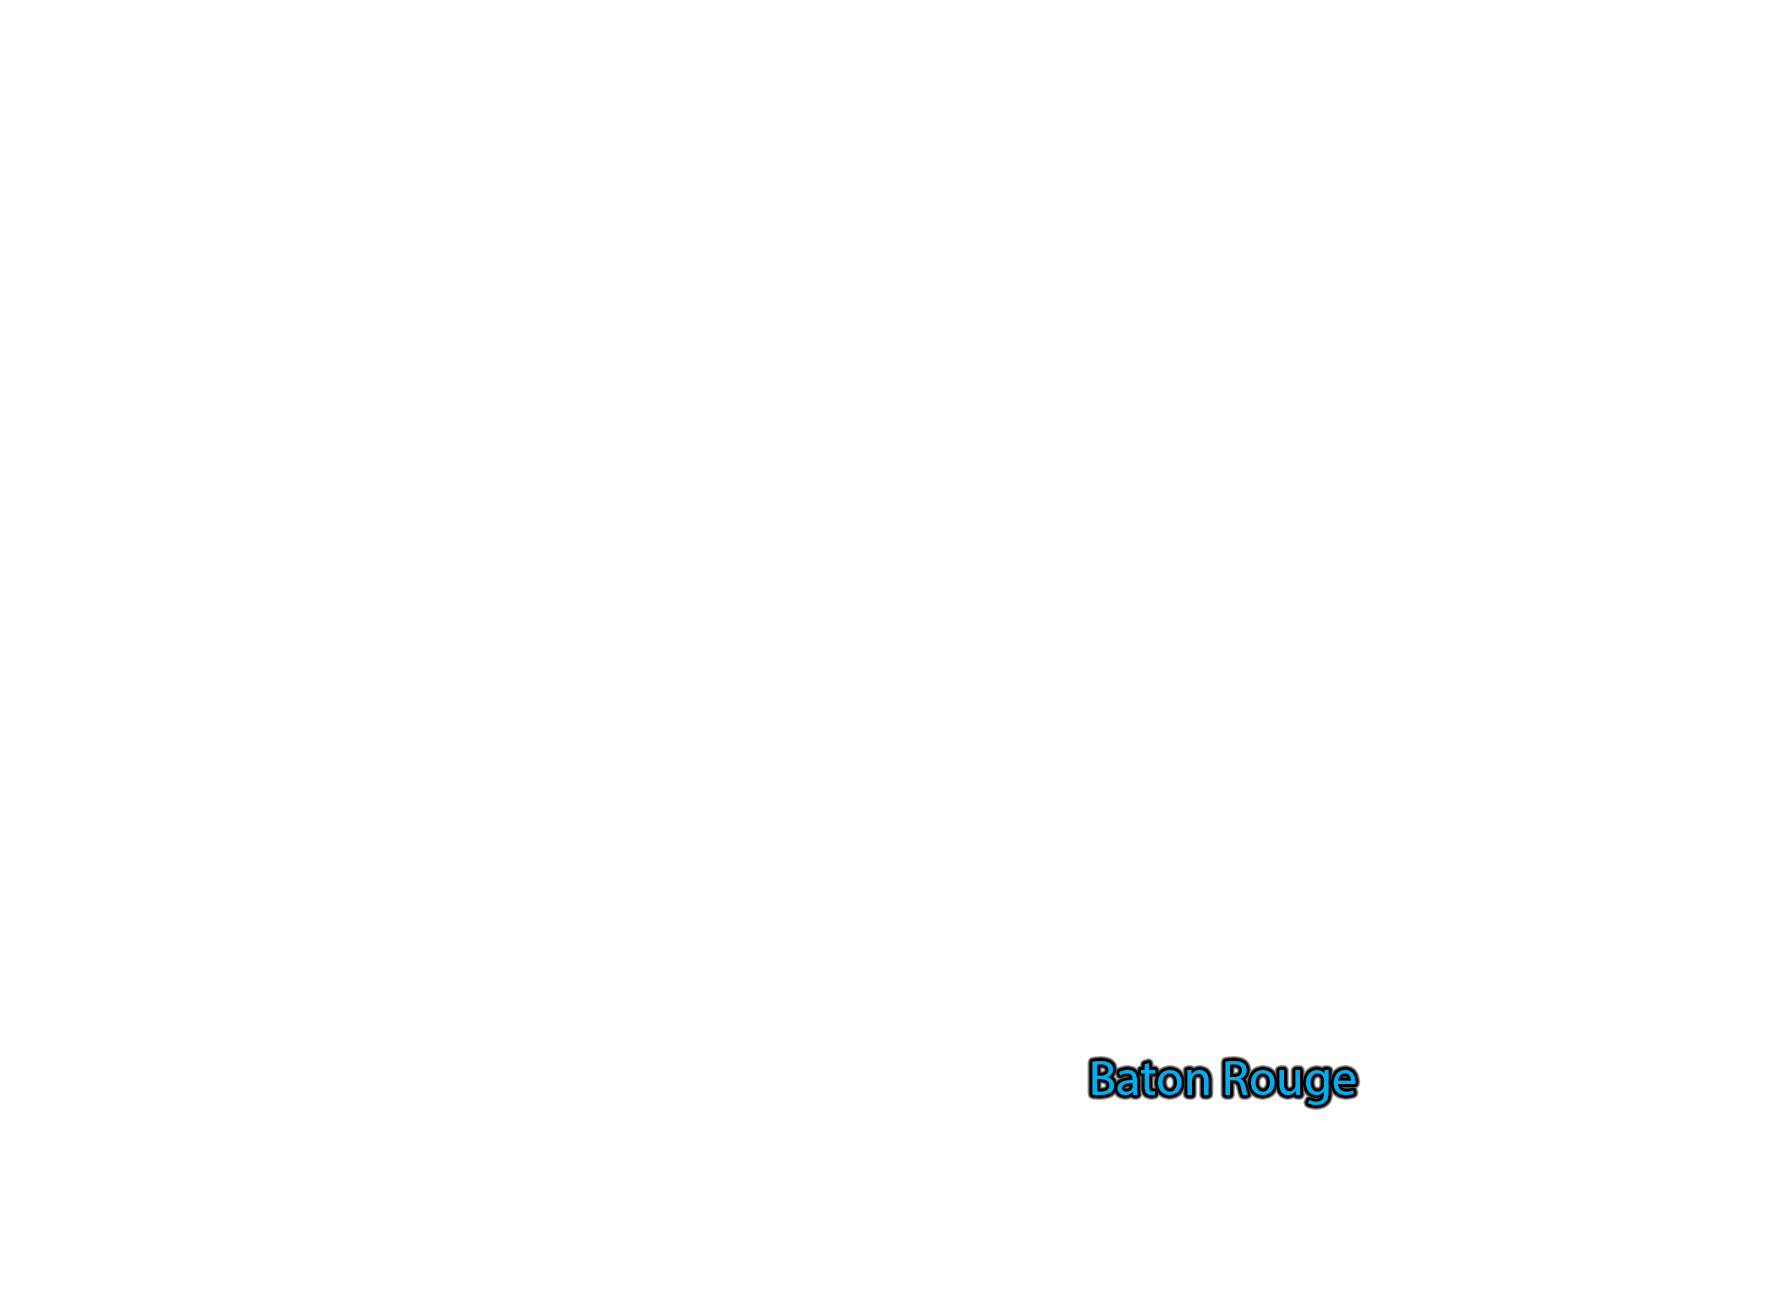 Baton-Rouge label with glow